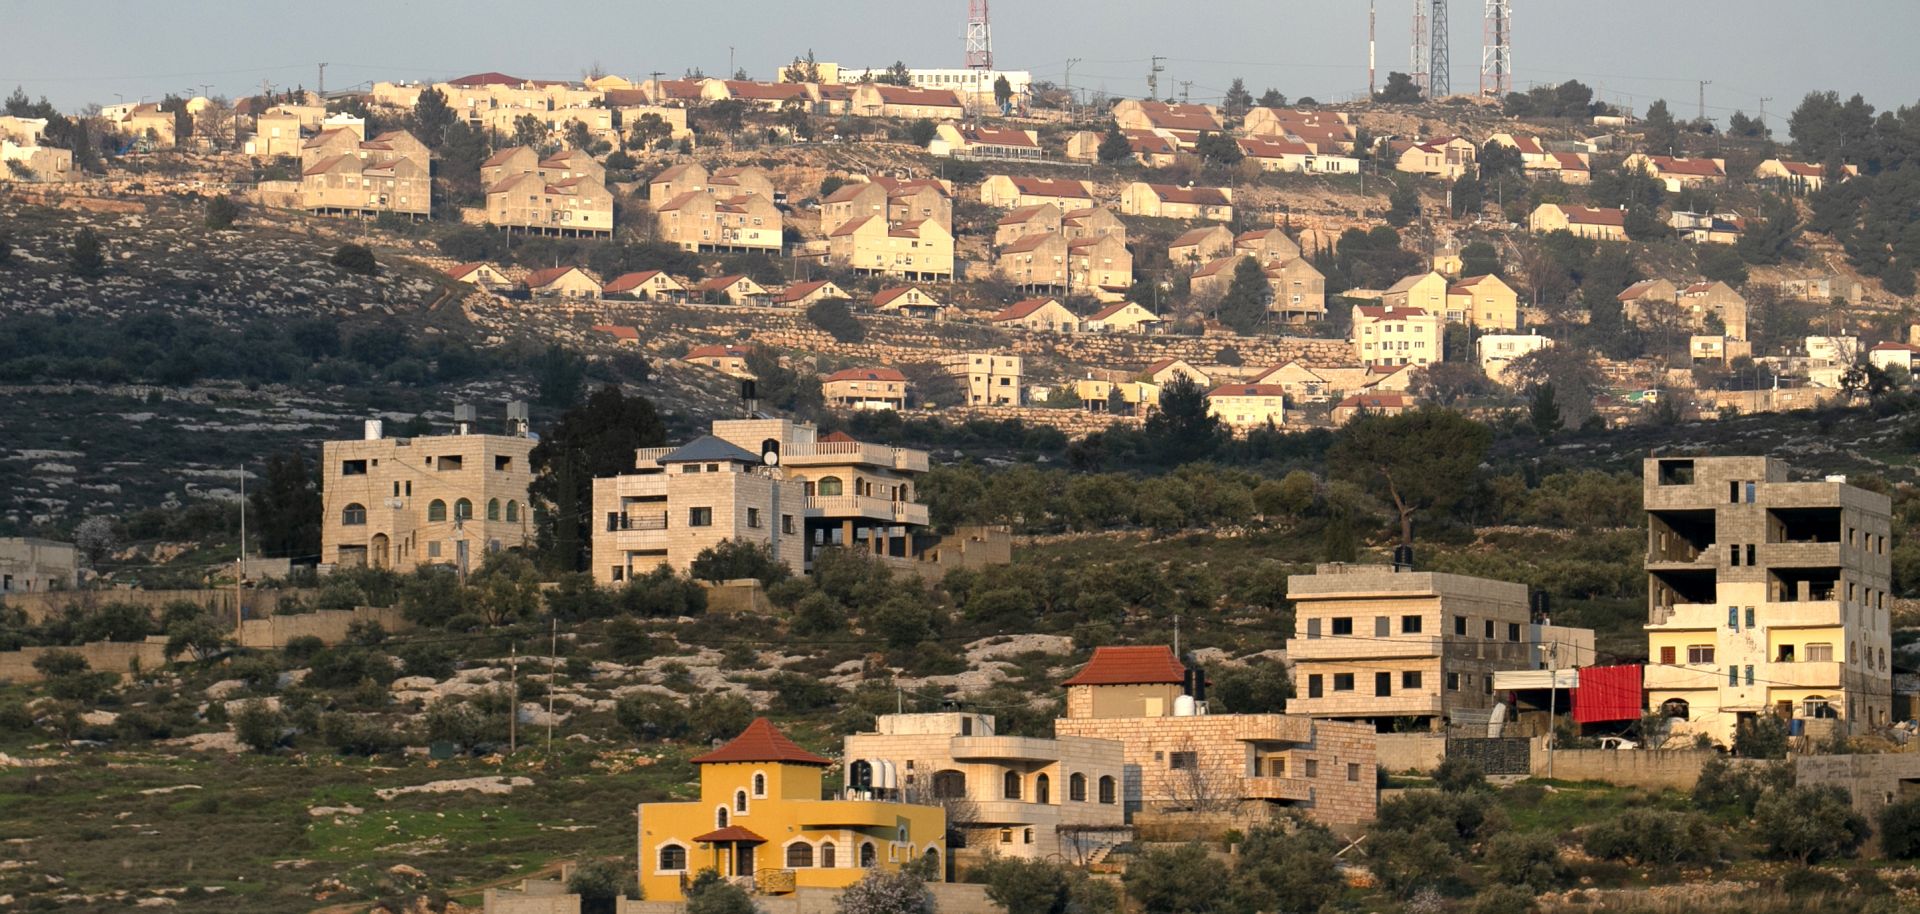 This picture taken on Feb. 22, 2020, shows the Palestinian West Bank village of Azmut, east of Nablus, with the Israeli settlement of Elon Moreh in the background.